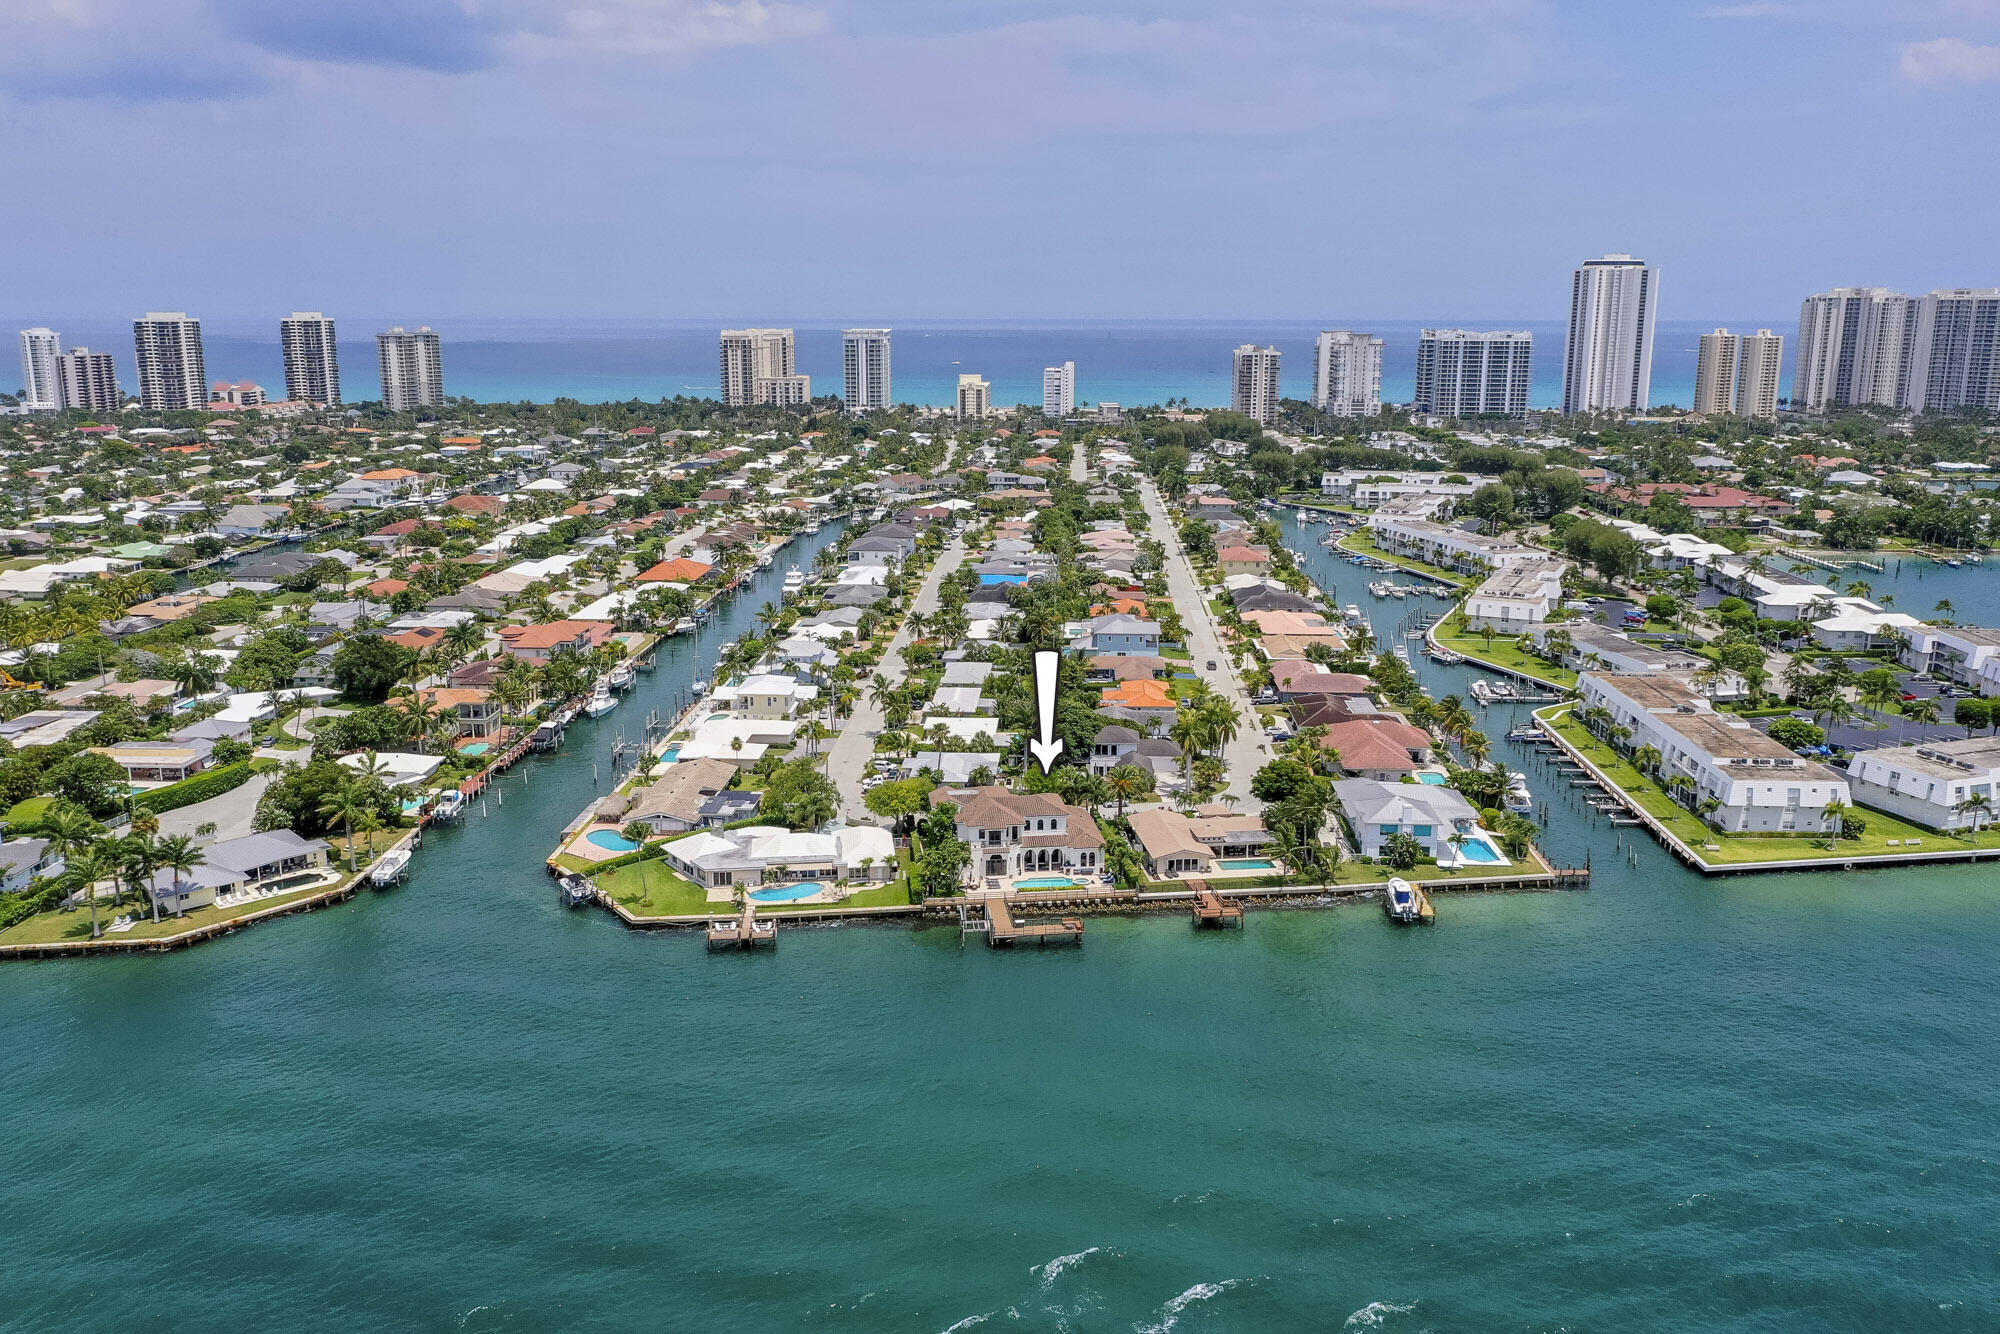 A truly stunning waterfront property with the best views on all of Singer Island. This 4BR 4/2BA + loft home is the ultimate boater's paradise, complete with a private dock and 12,000 lb boat lift. The level of detail and sophistication can be seen throughout, from the grand entrance with coffered volume ceilings, crown moldings, and built-in surround sound to the custom kitchen with seamless gas appliances and beautiful wood cabinetry. Enjoy breathtaking sunsets and skyline views from the back patio featuring a full summer kitchen, heated pool and spillover spa, all surrounded by the crystal blue waters of the intracoastal. From the elegant finishes to the unparalleled water views, this spectacular home is the perfect South Florida retreat.